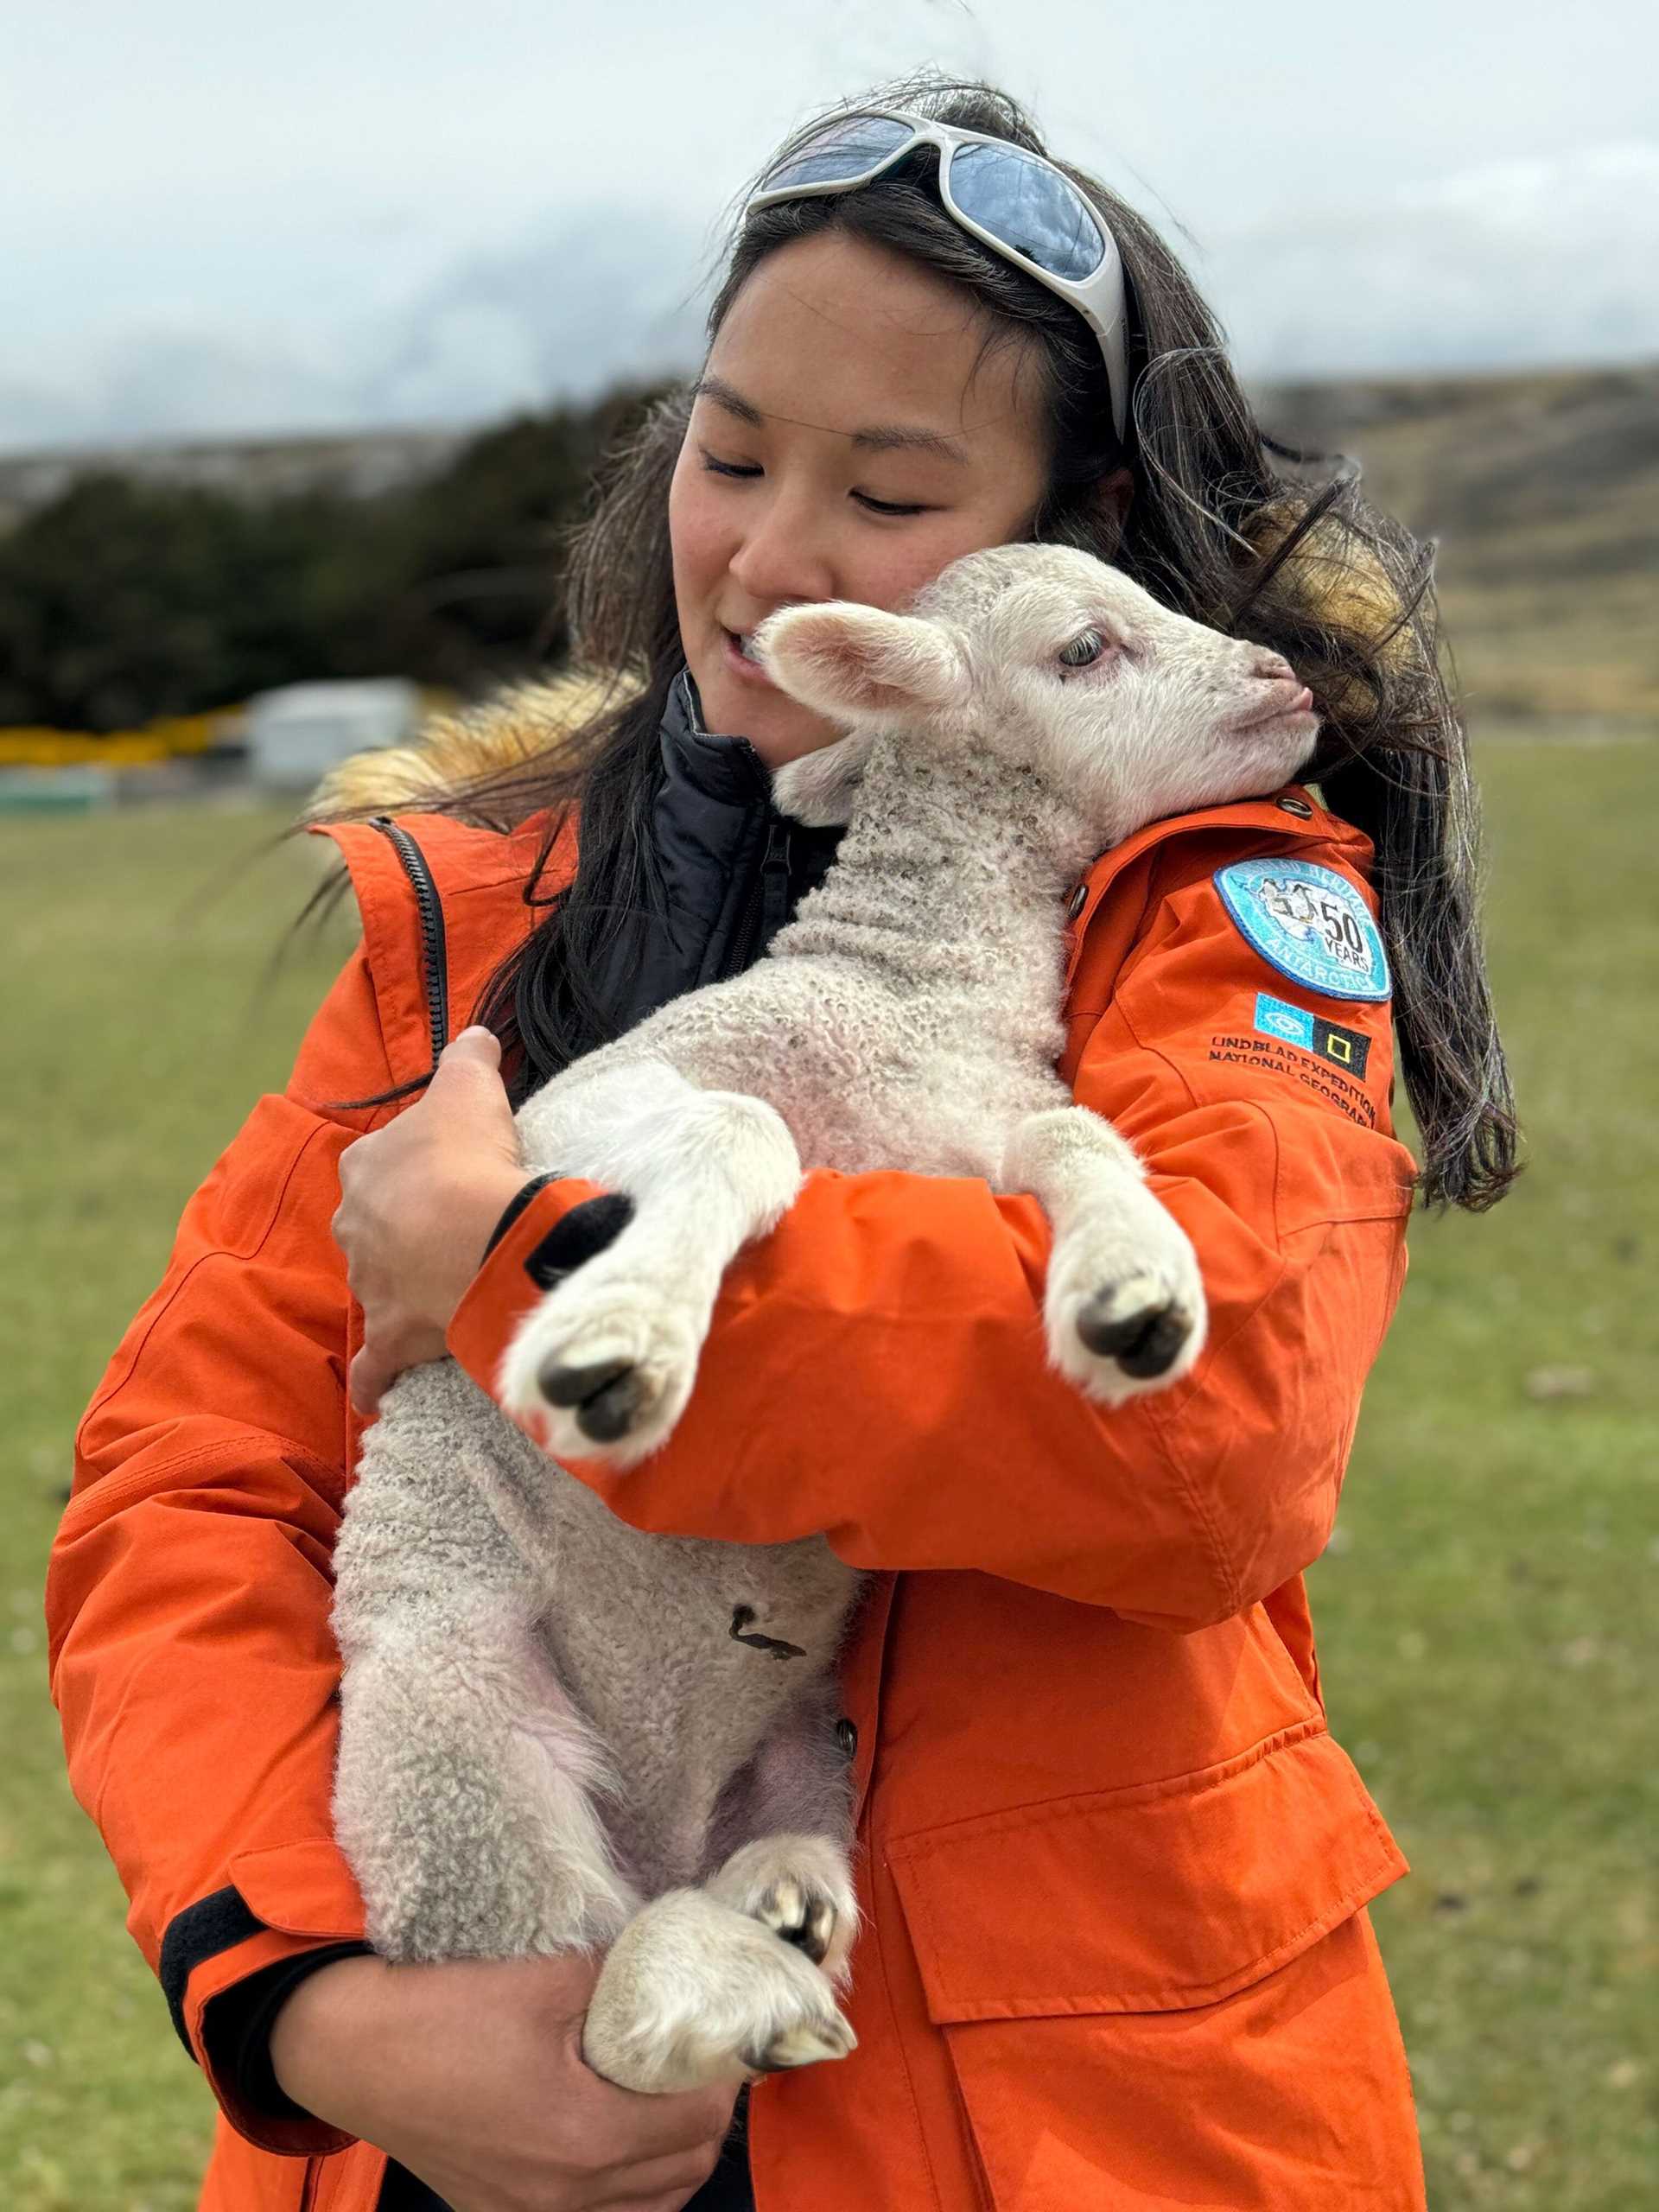 a woman in an orange parka holds a baby lamb